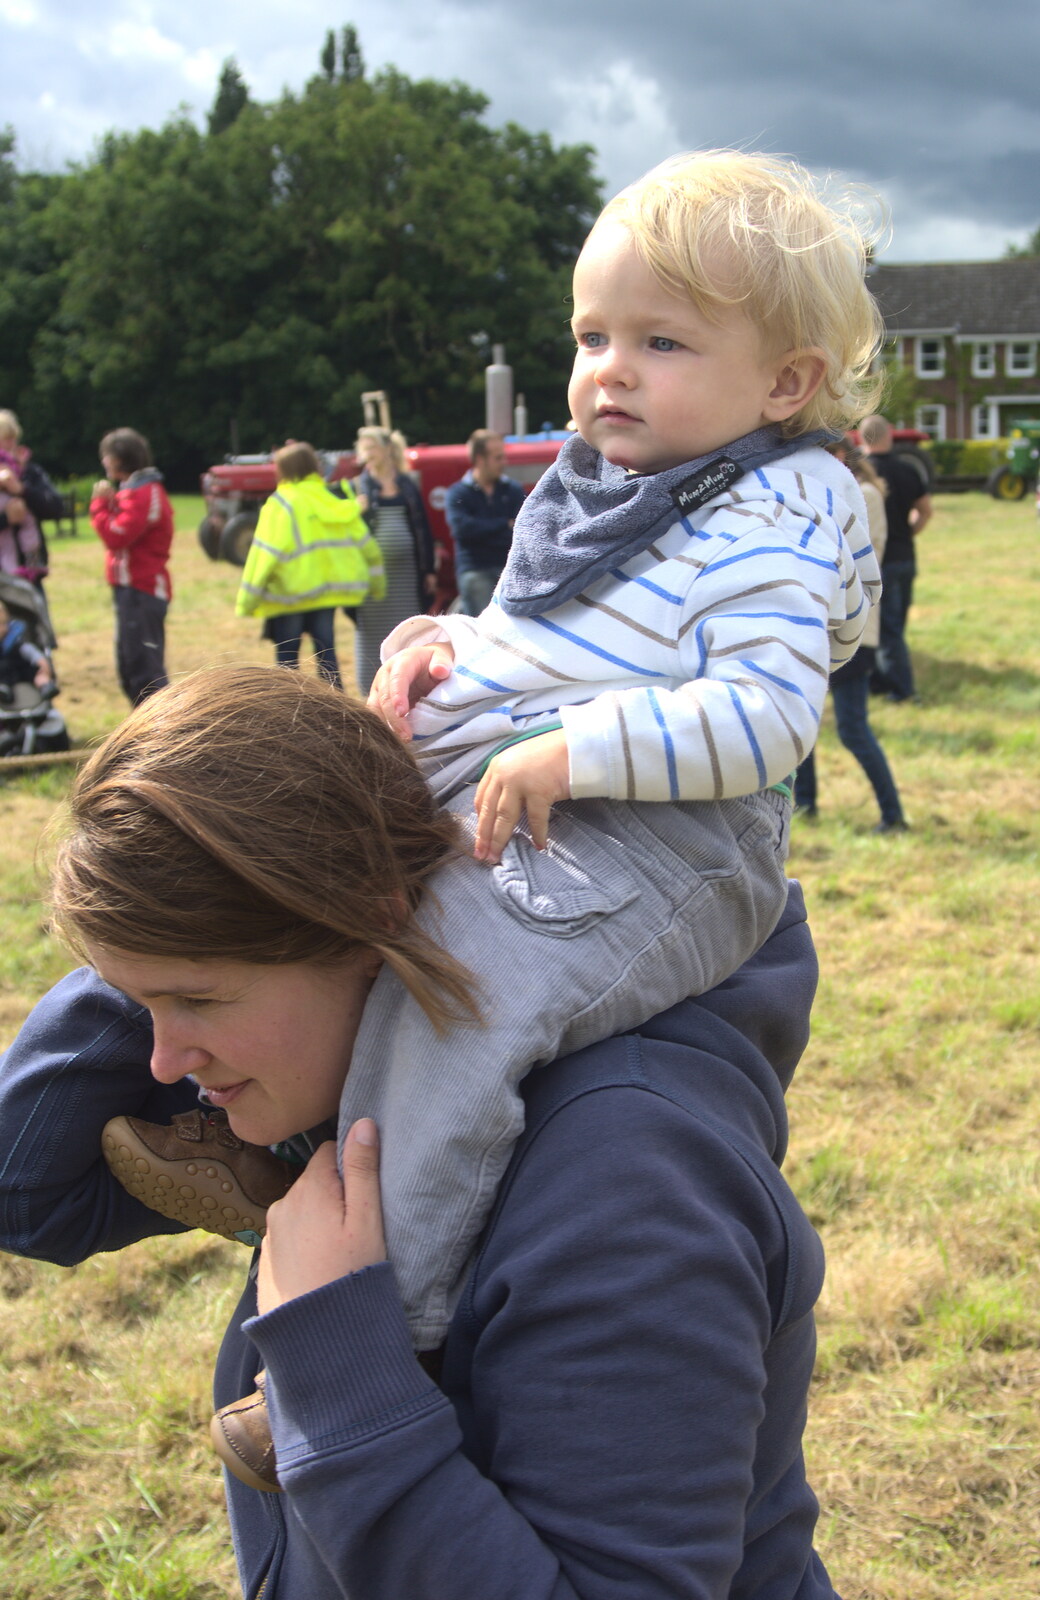 Isobel carries Harry around from Thrandeston Pig Roast and Tractors, Thrandeston Little Green, Suffolk - 23rd June 2013